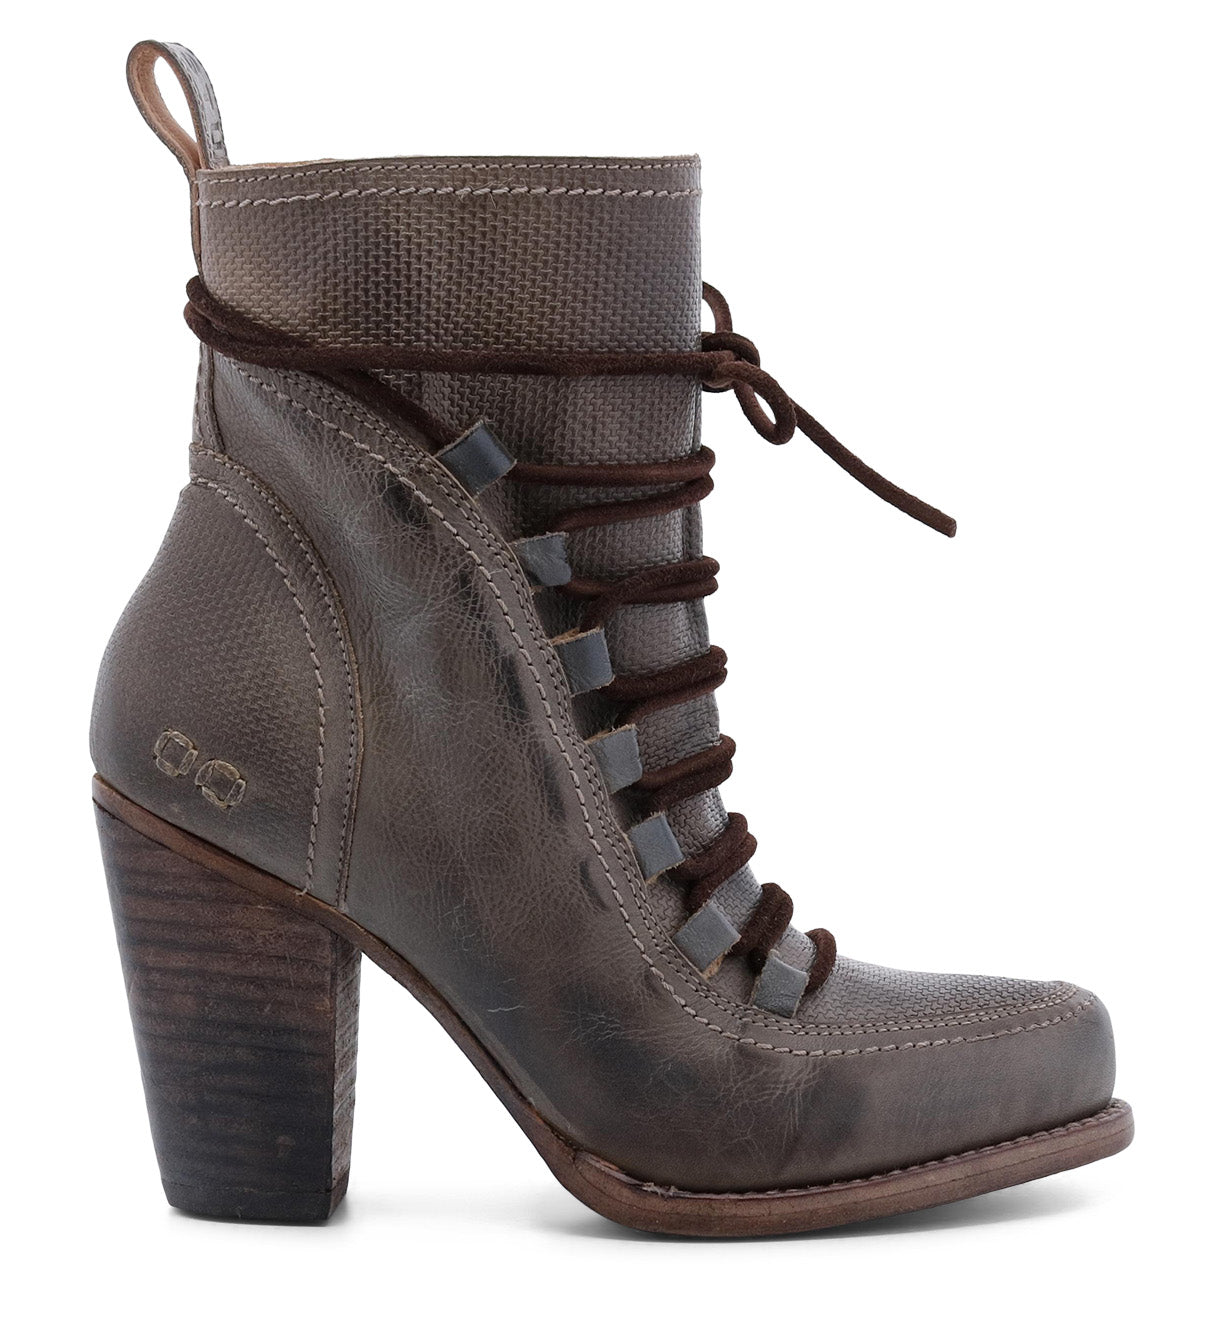 A women's Izetta ankle boot by Bed Stu with a wooden heel.